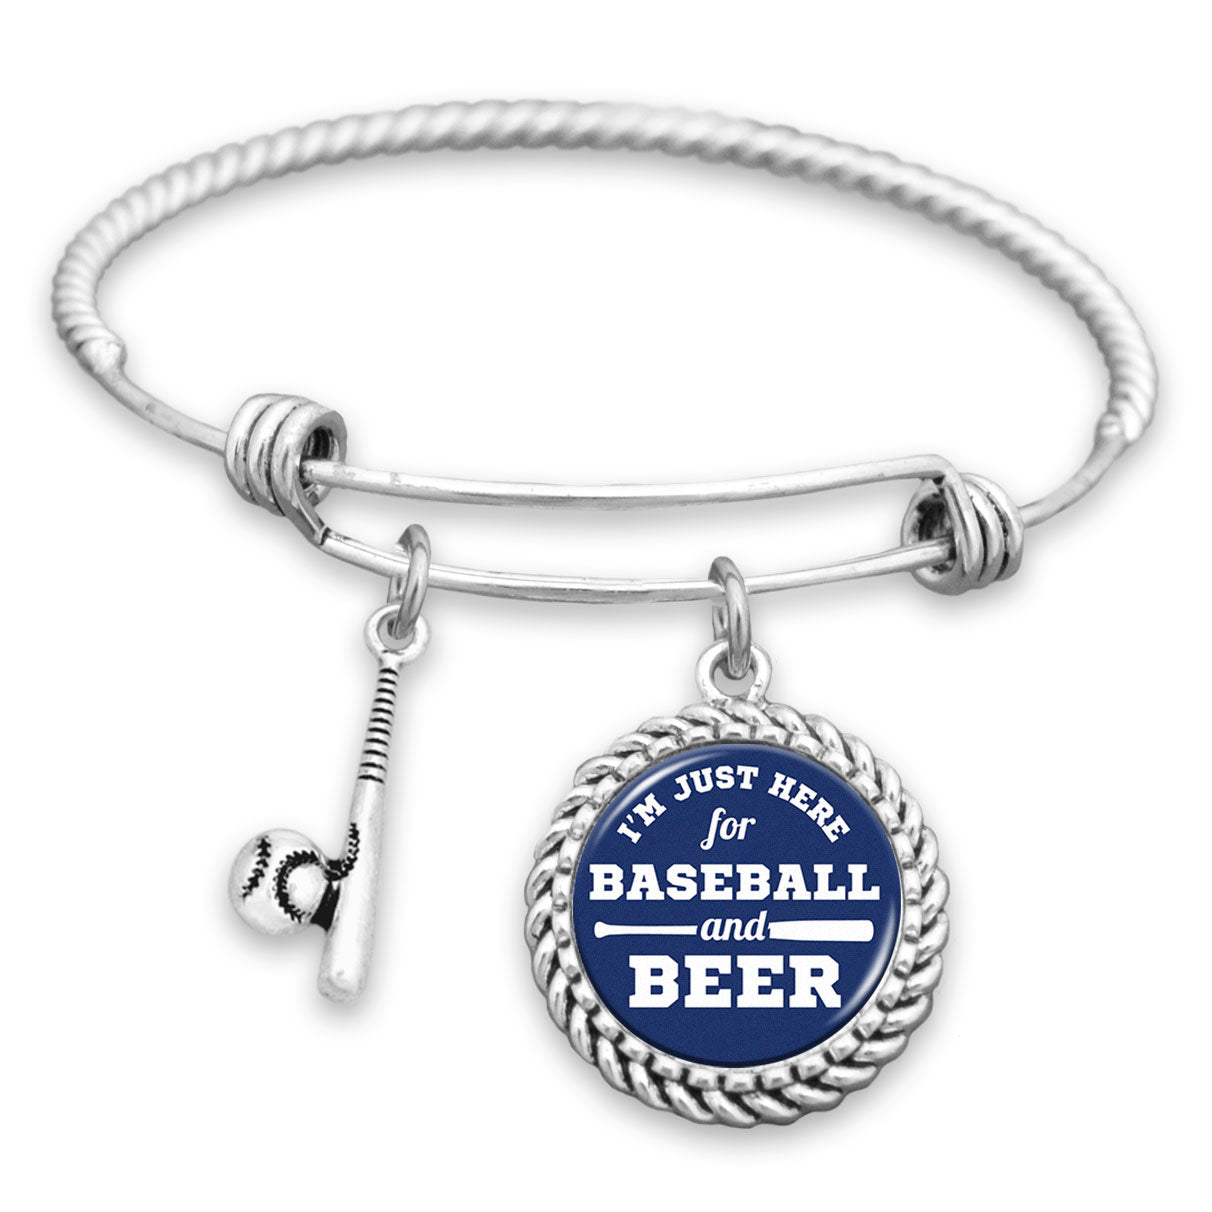 Los Angeles I'm Just Here For Baseball And Beer Charm Bracelet